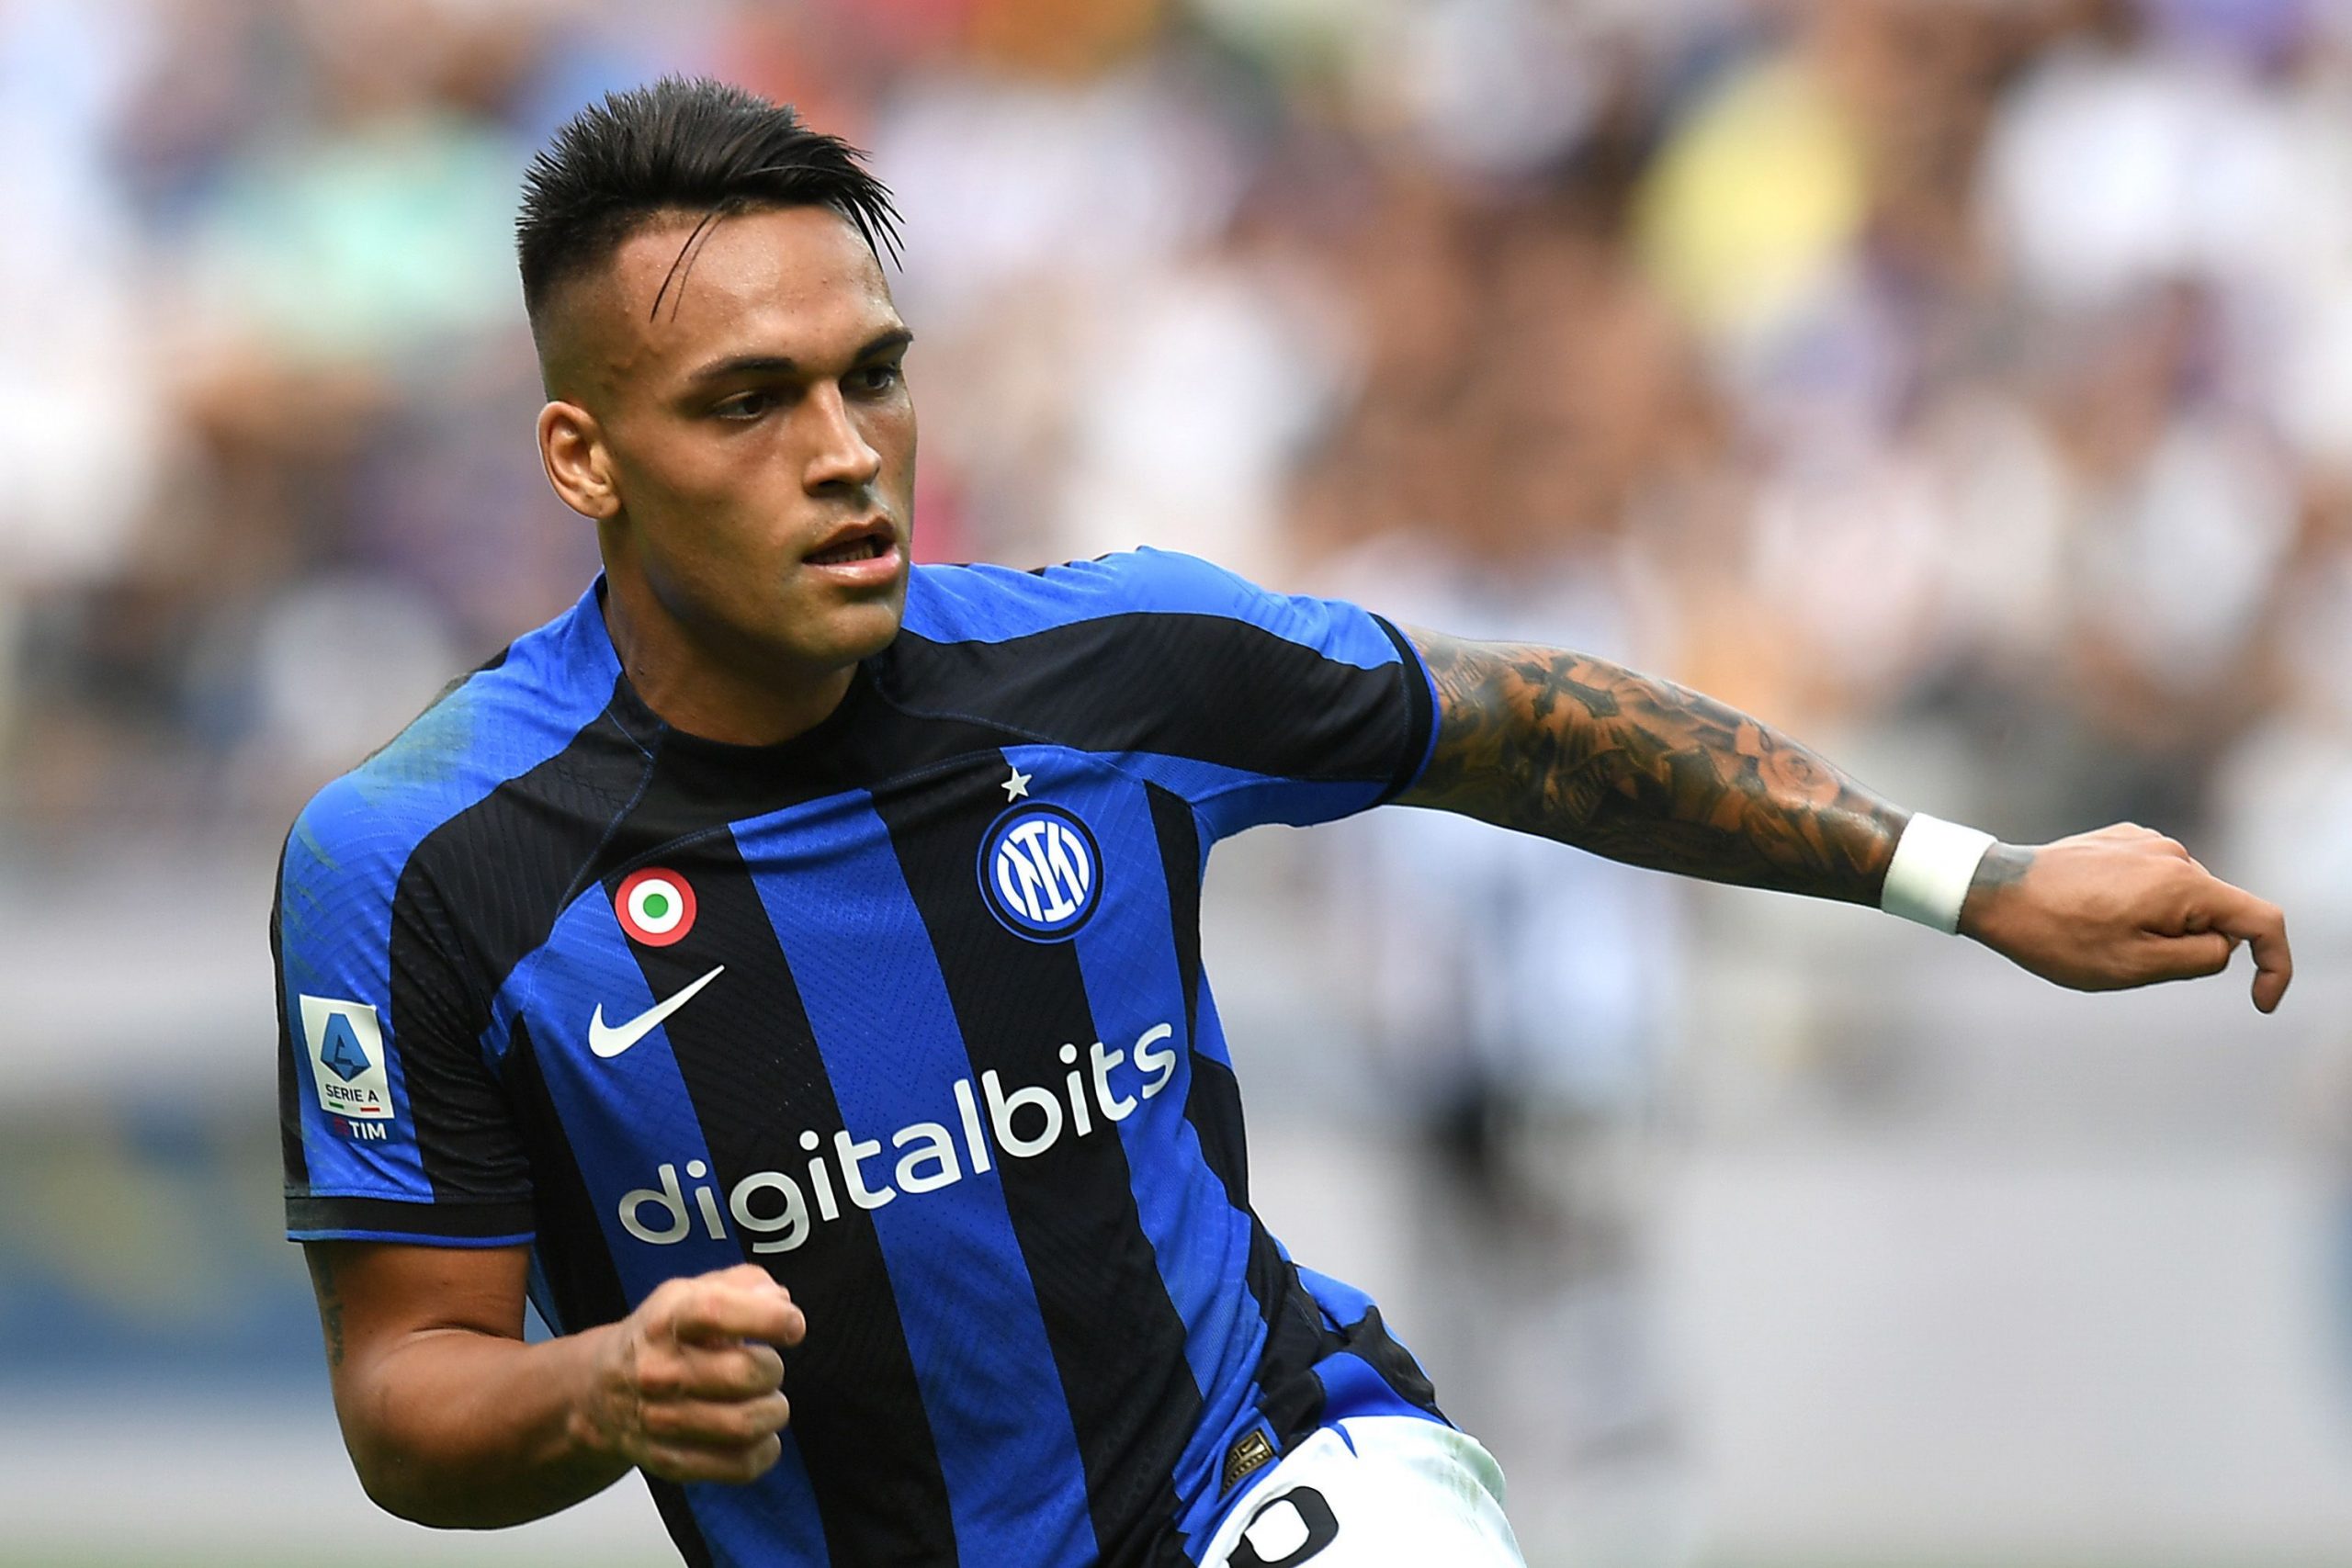 Lautaro Martinez of Inter Milan has been linked with Tottenham Hotspur in the past.